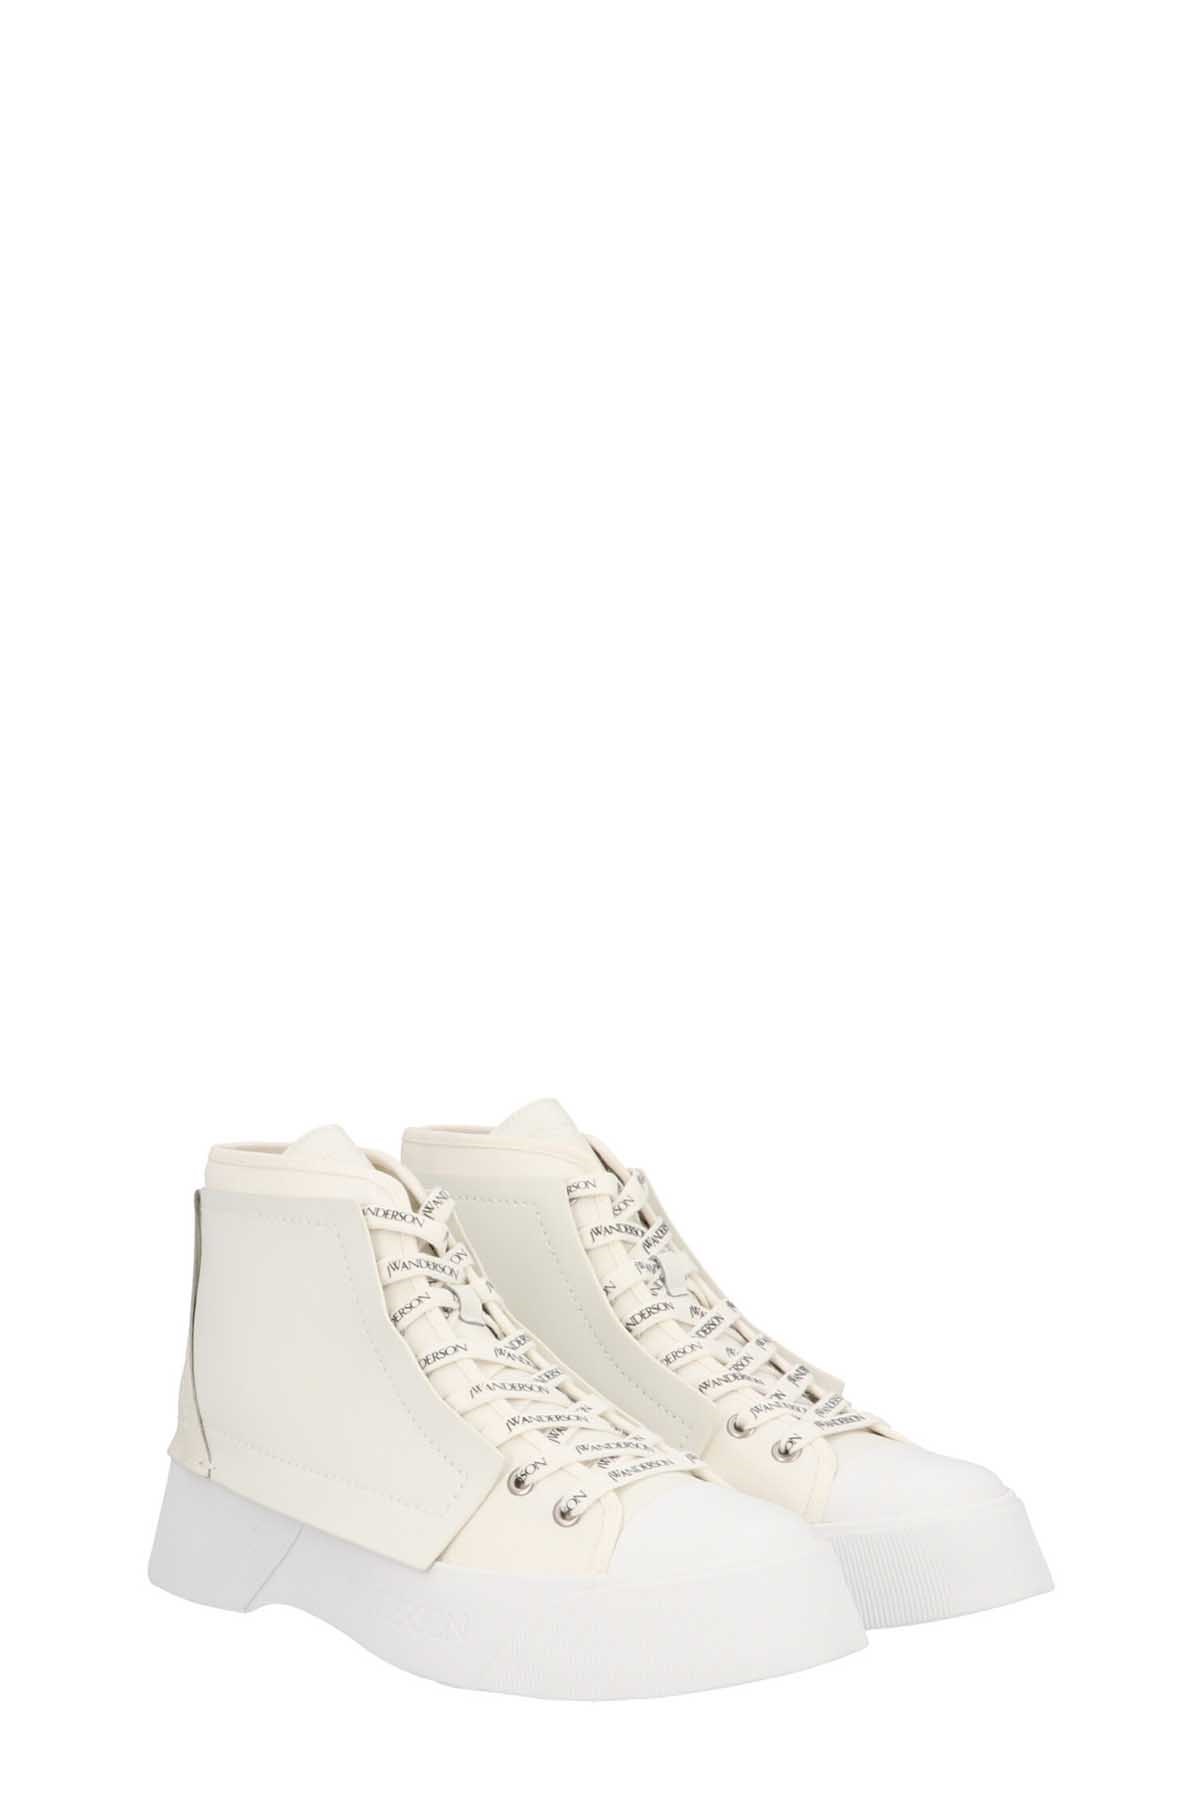 J.W.ANDERSON 'Trainer' High-Top Sneakers